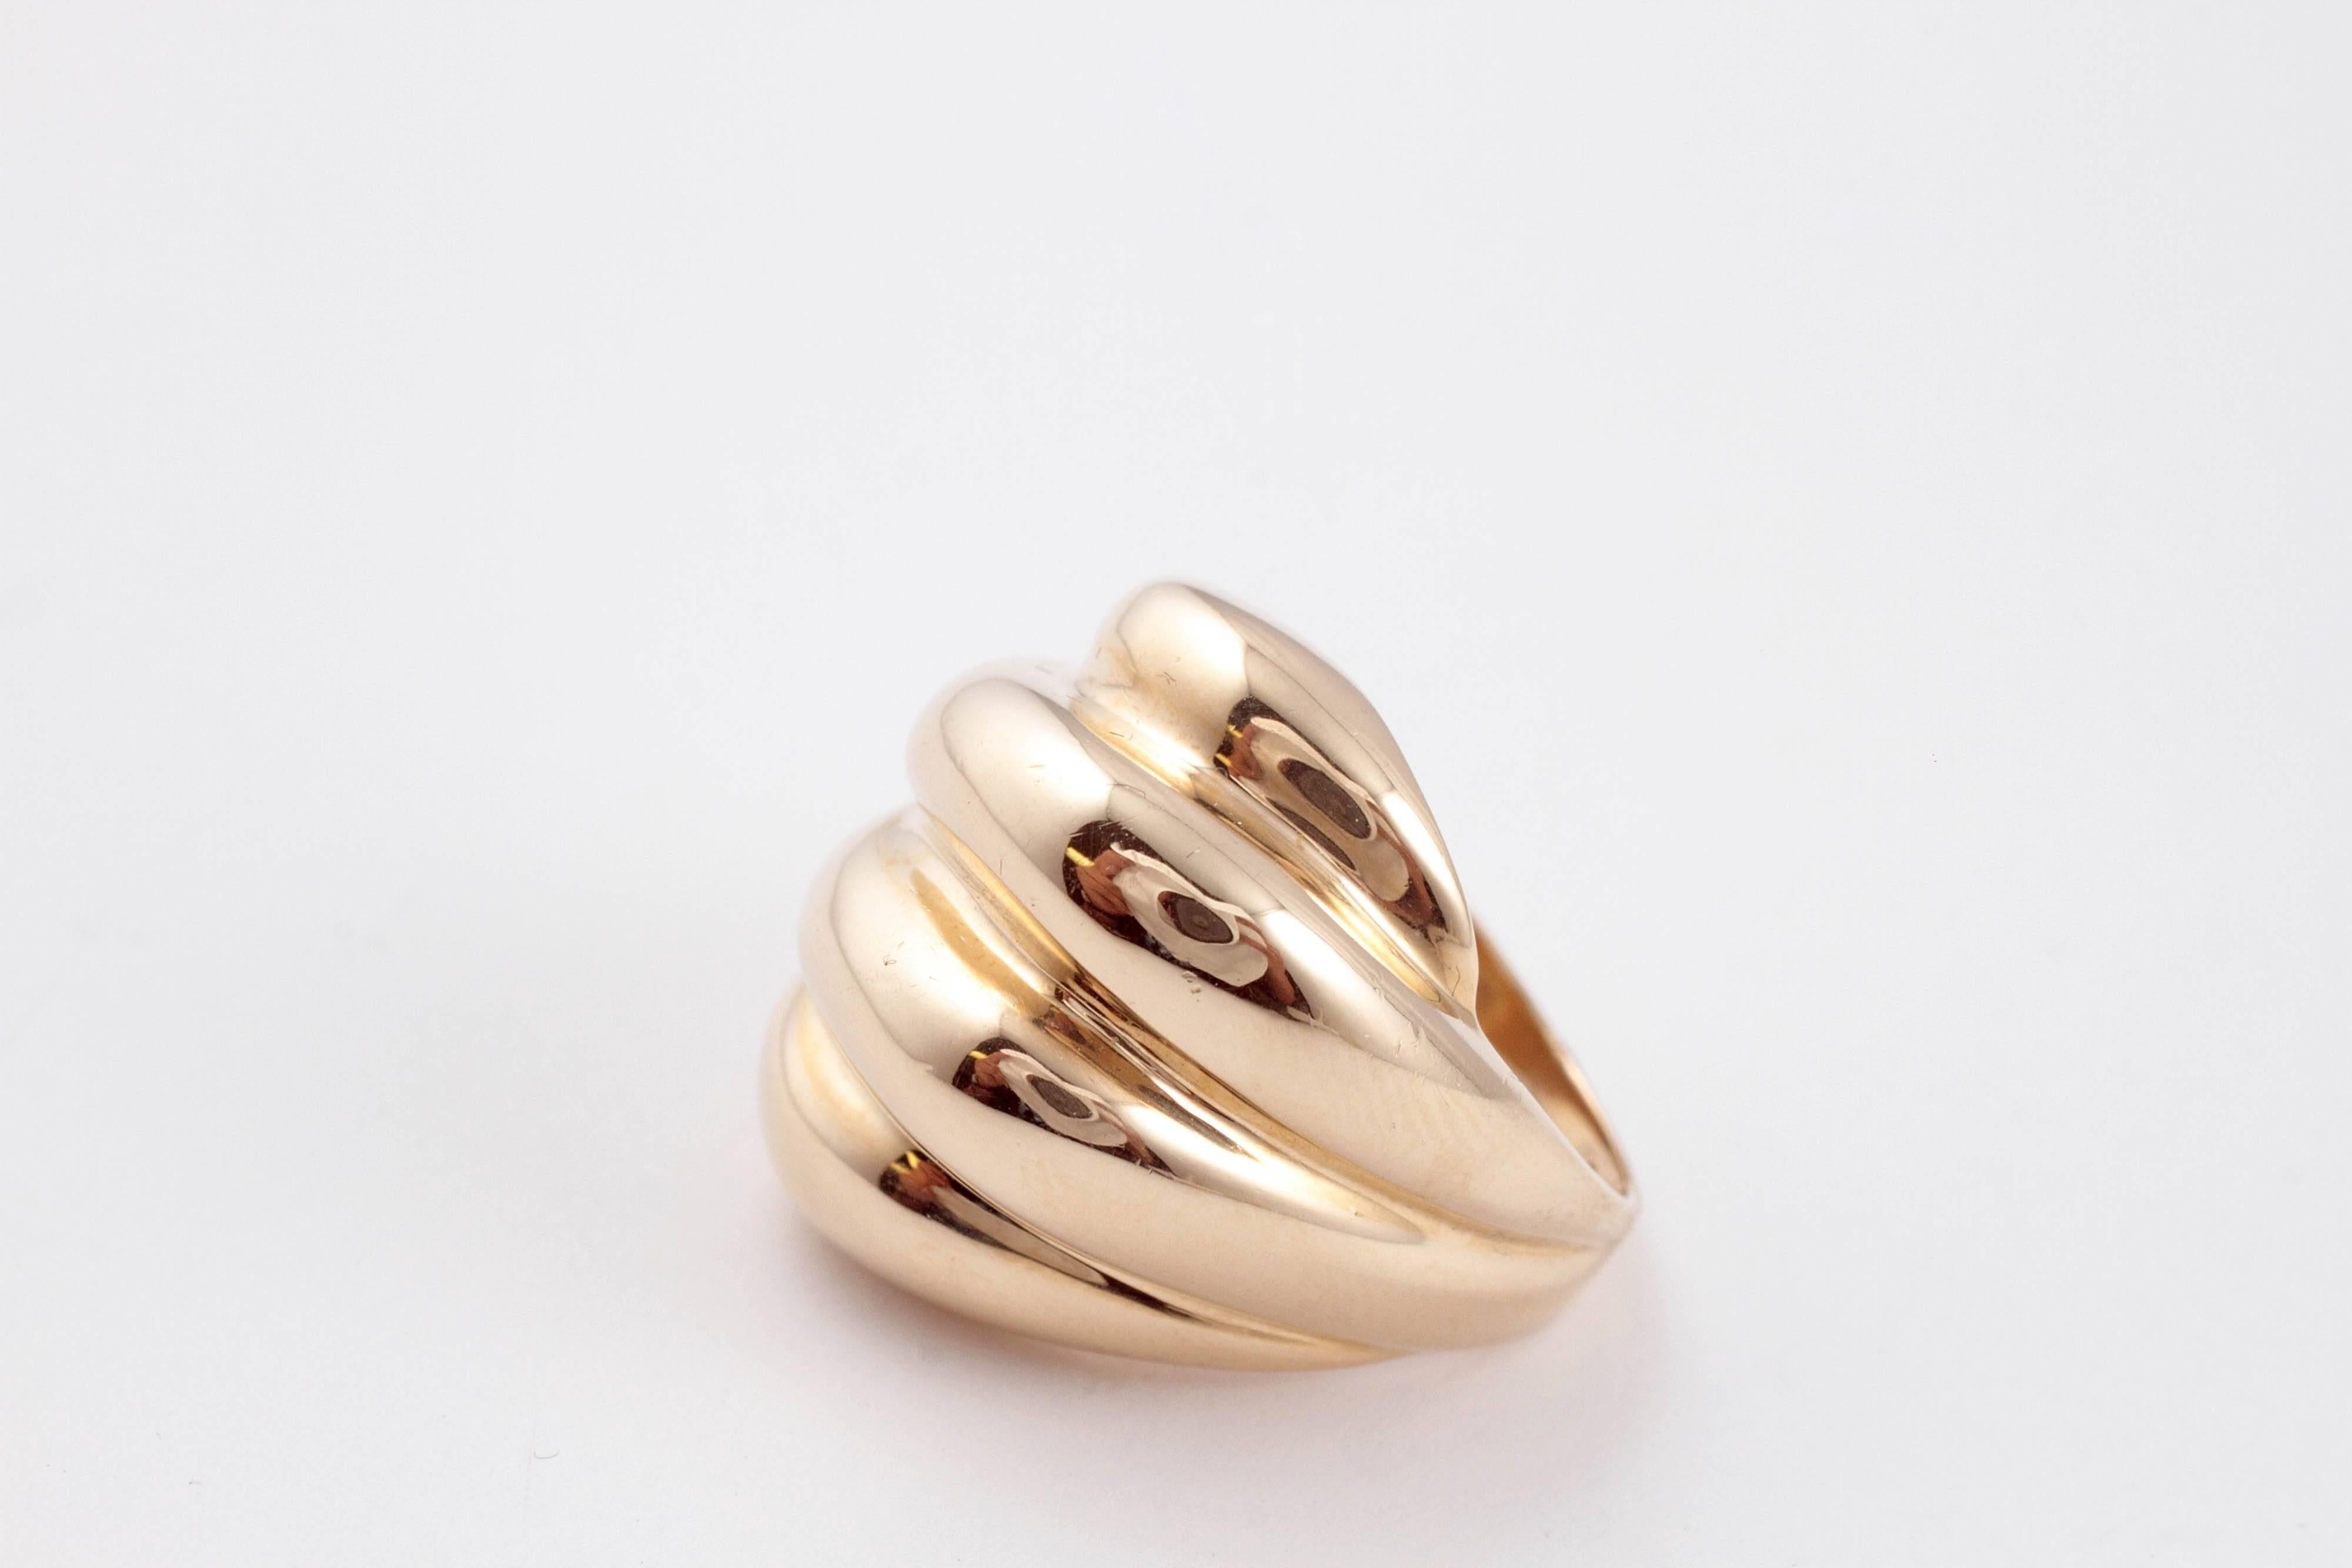 In a 14 karat, yellow gold, highly polished, fluted form, perfect for every day!  Size 5 1/2